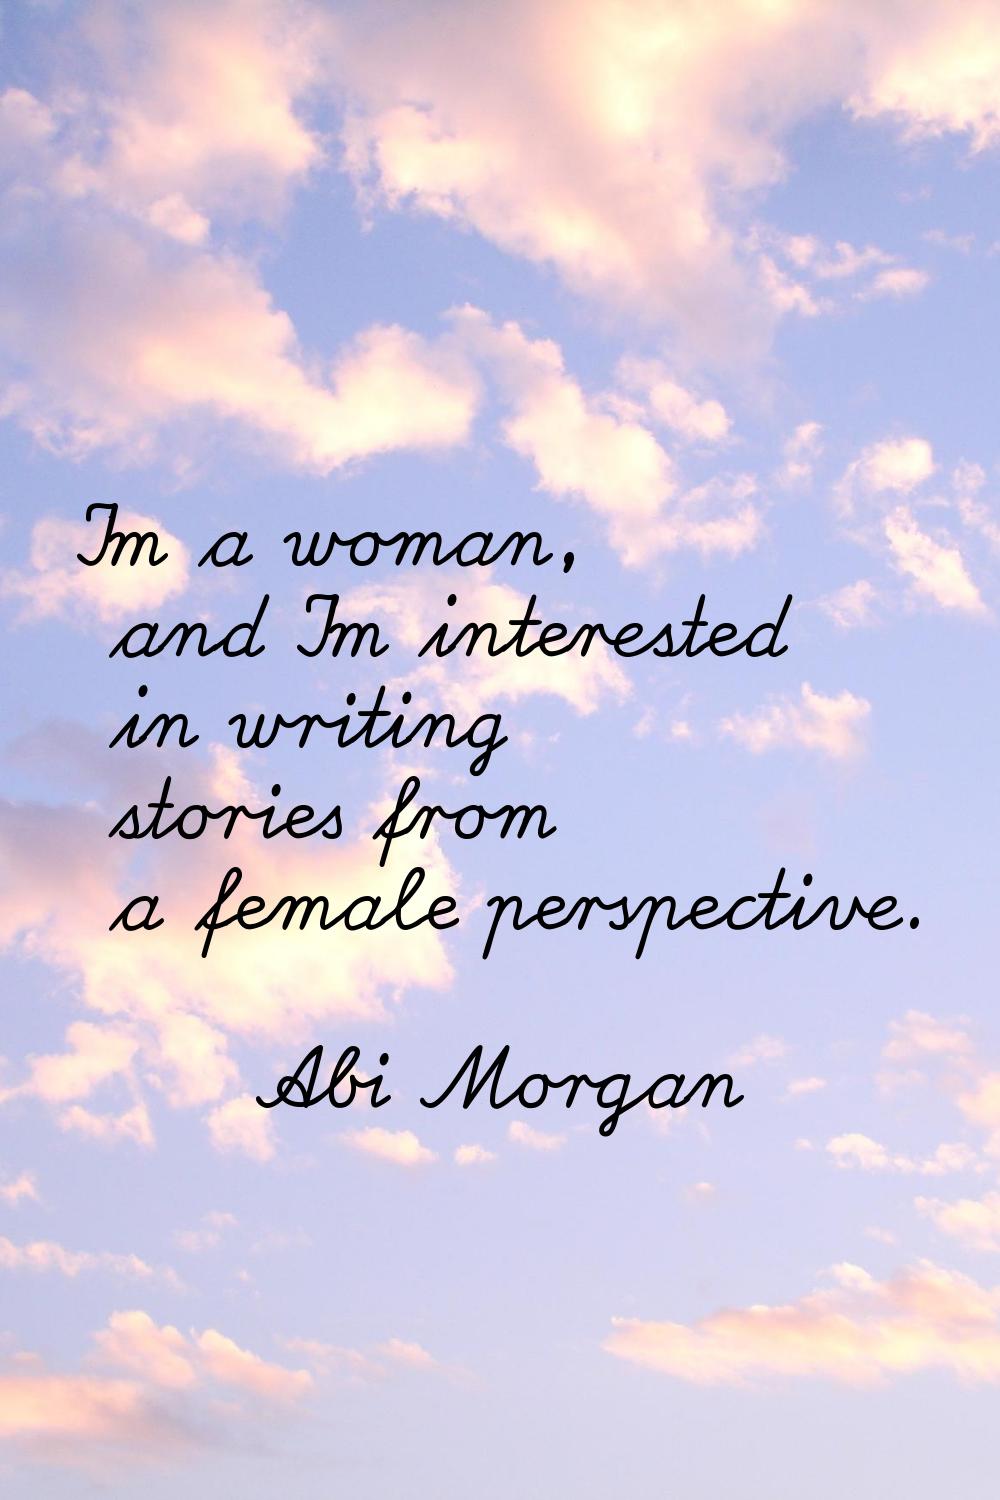 I'm a woman, and I'm interested in writing stories from a female perspective.